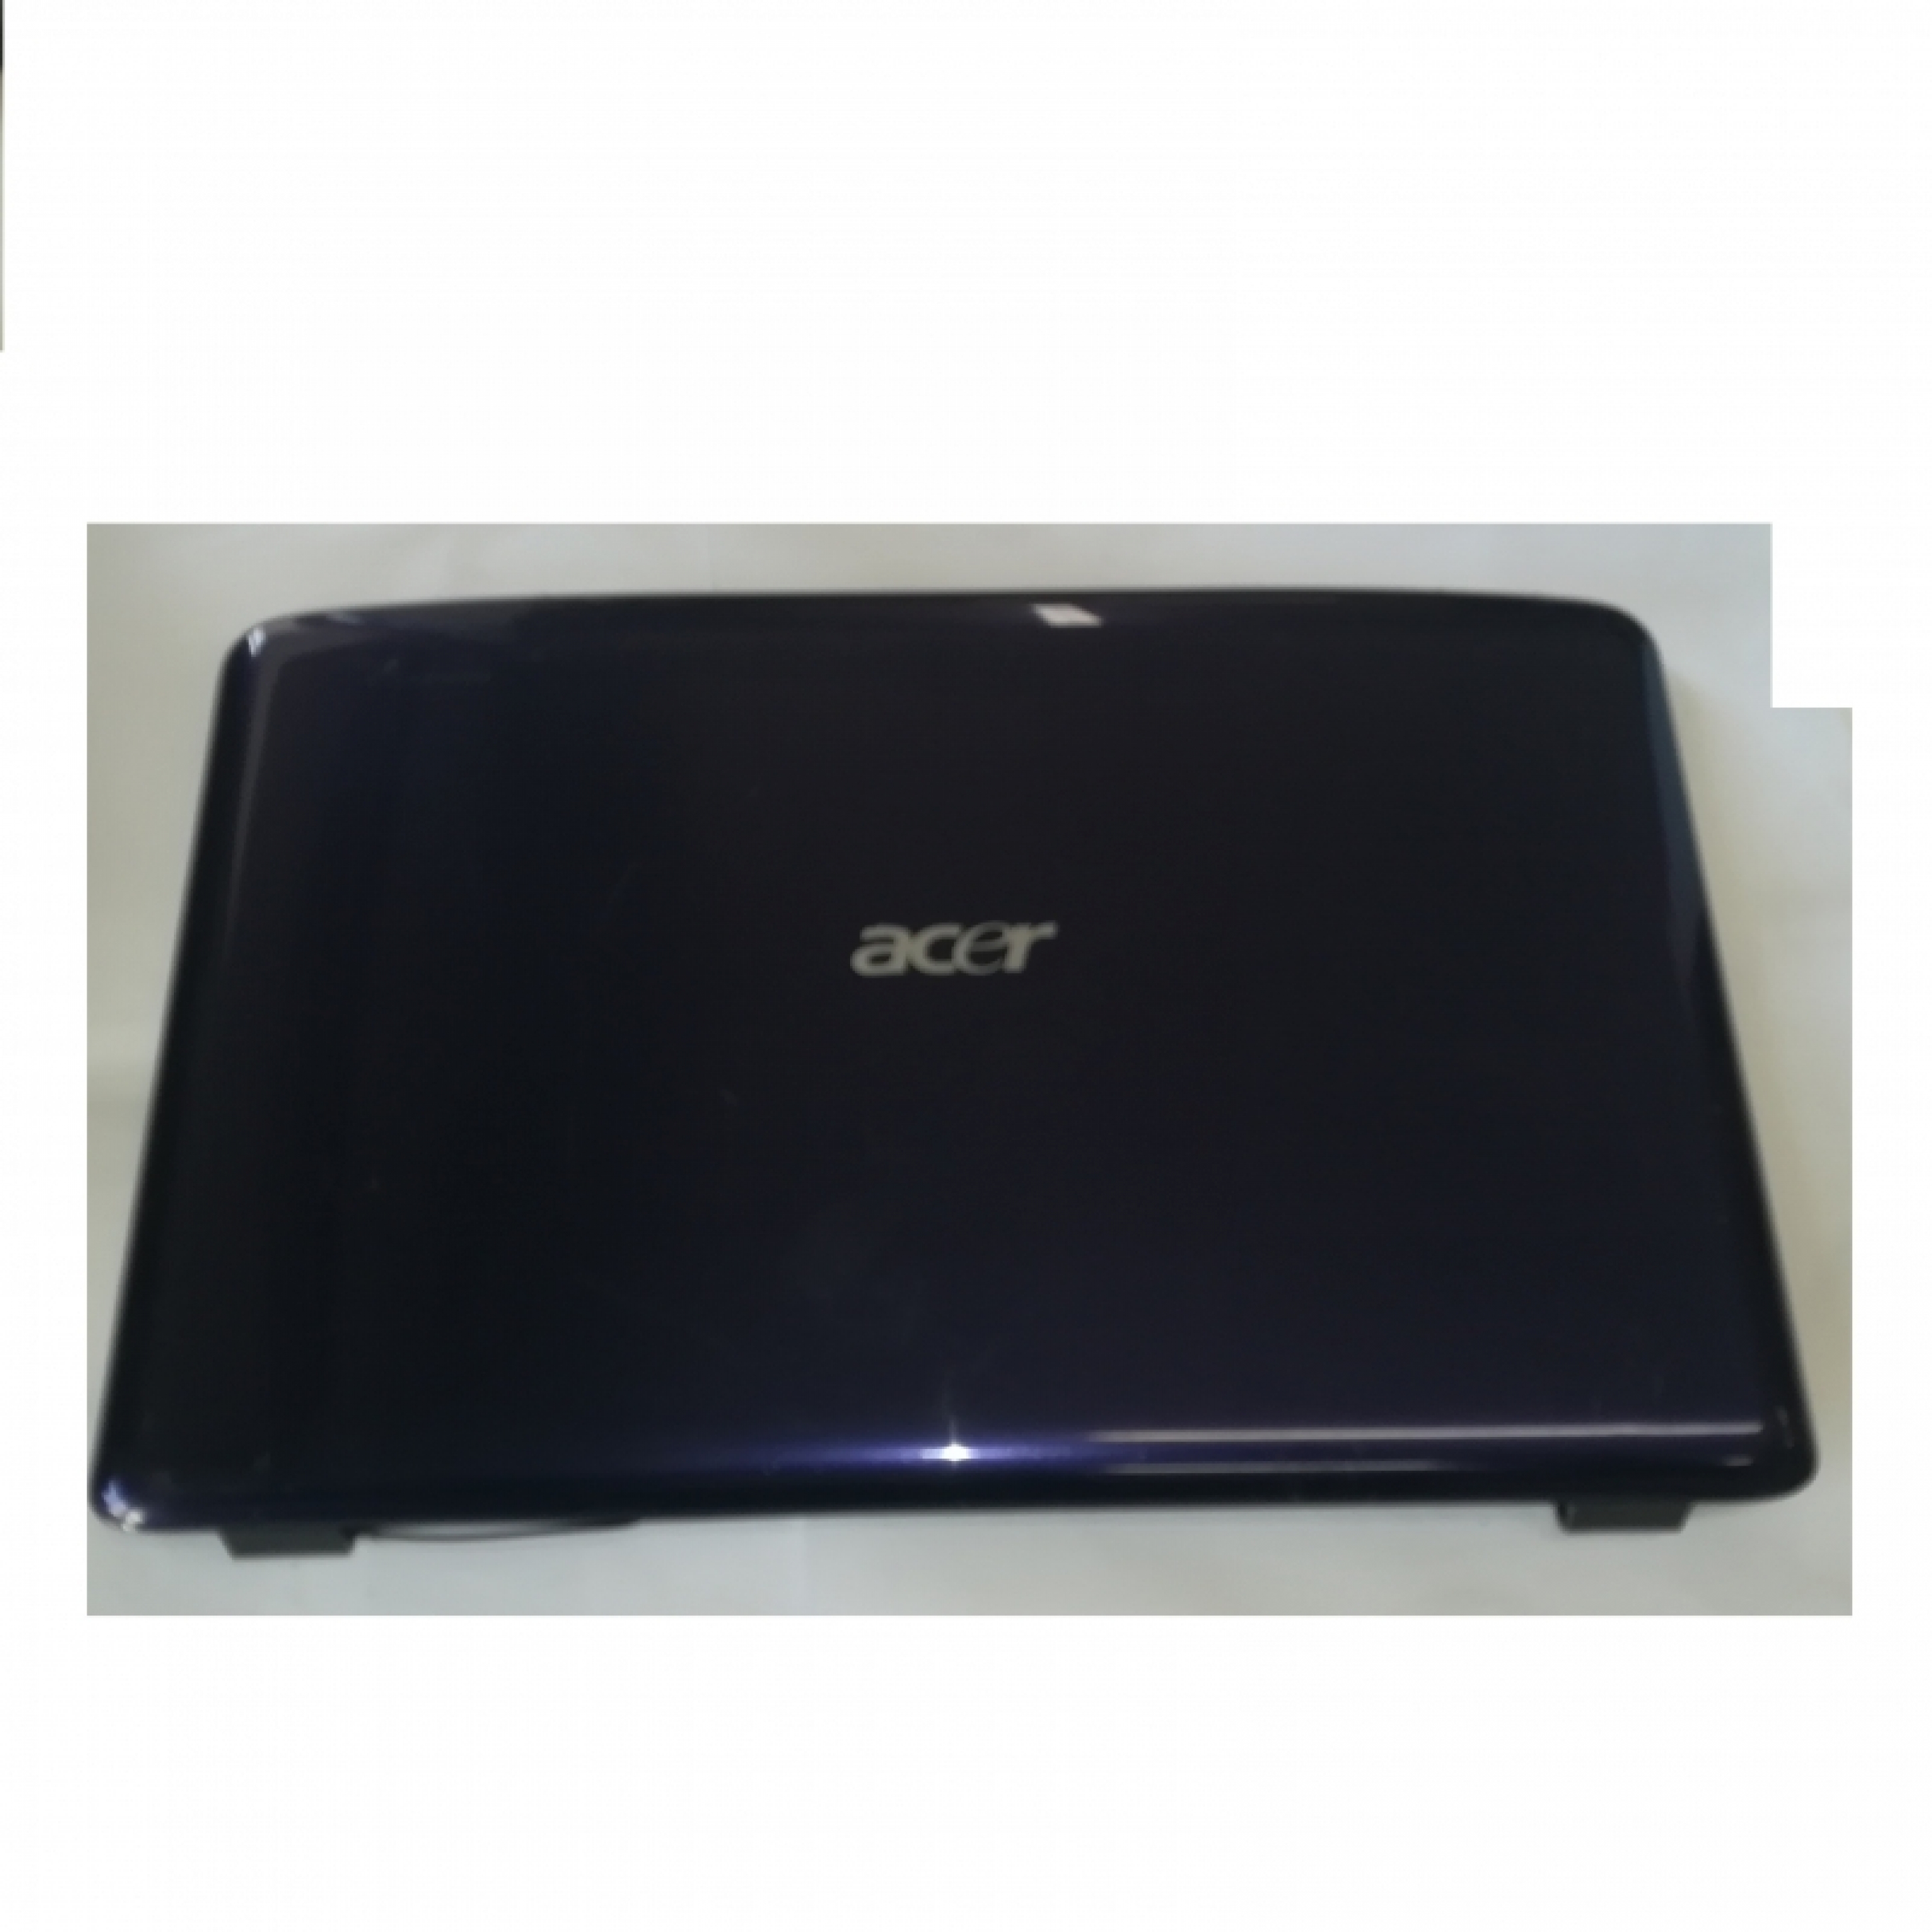 4 -  Scocche complete Acer Aspire 5740g con webcam touchpad casse